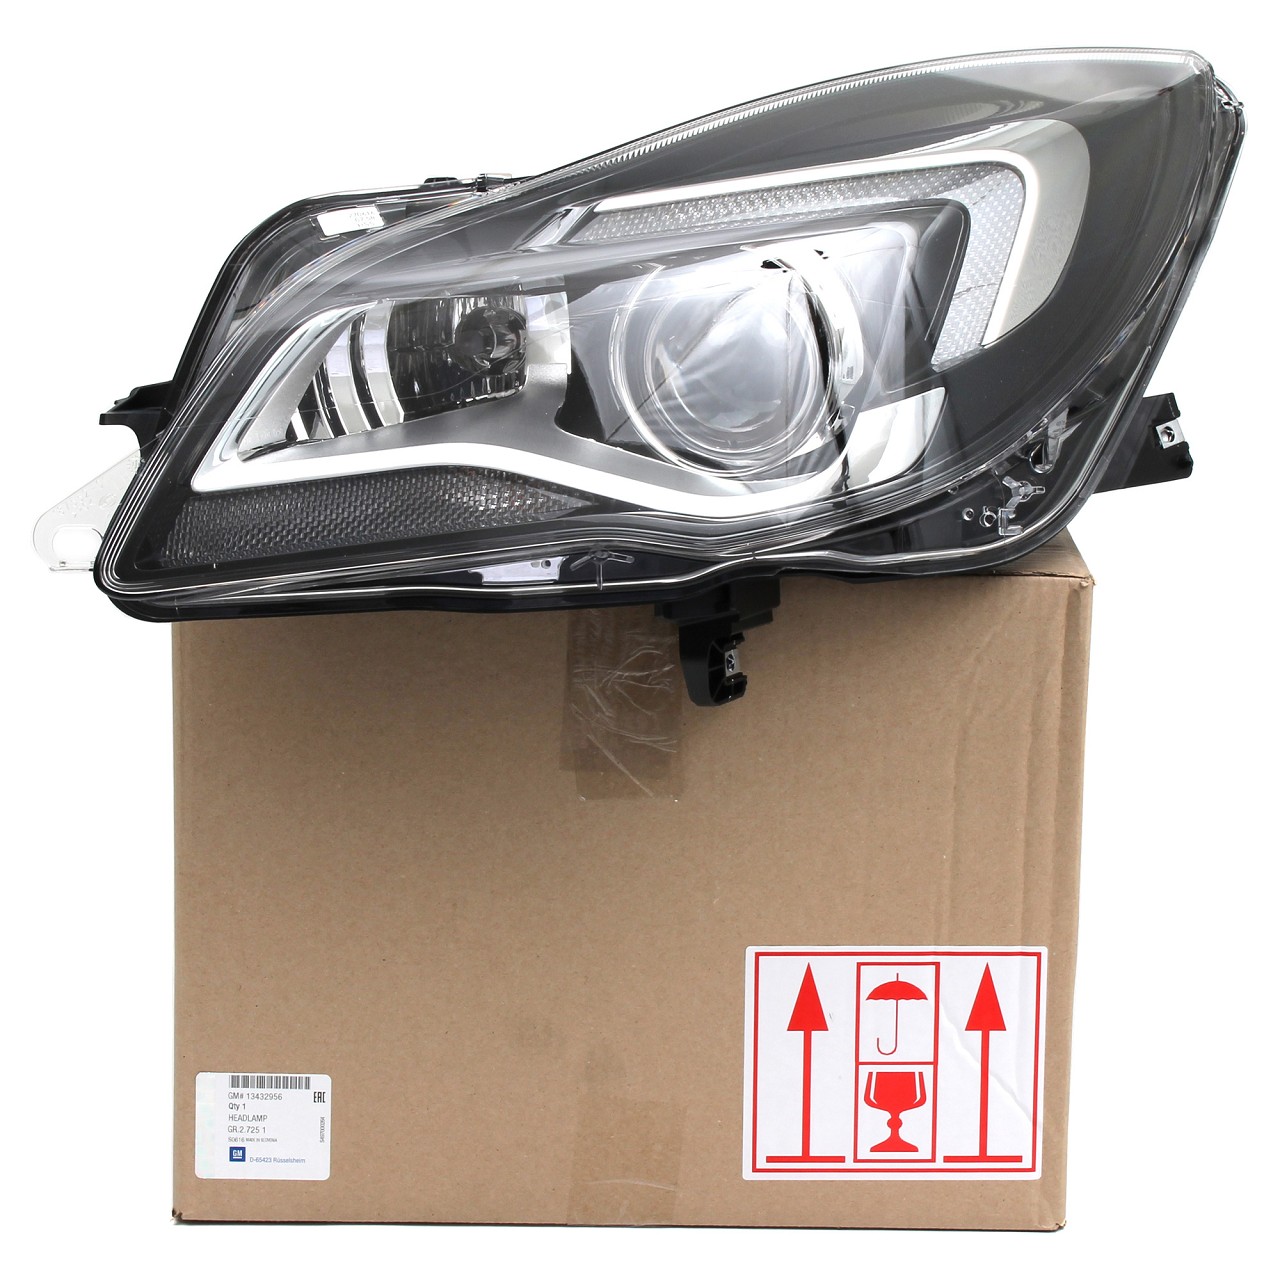 Original car headlights from the automakers